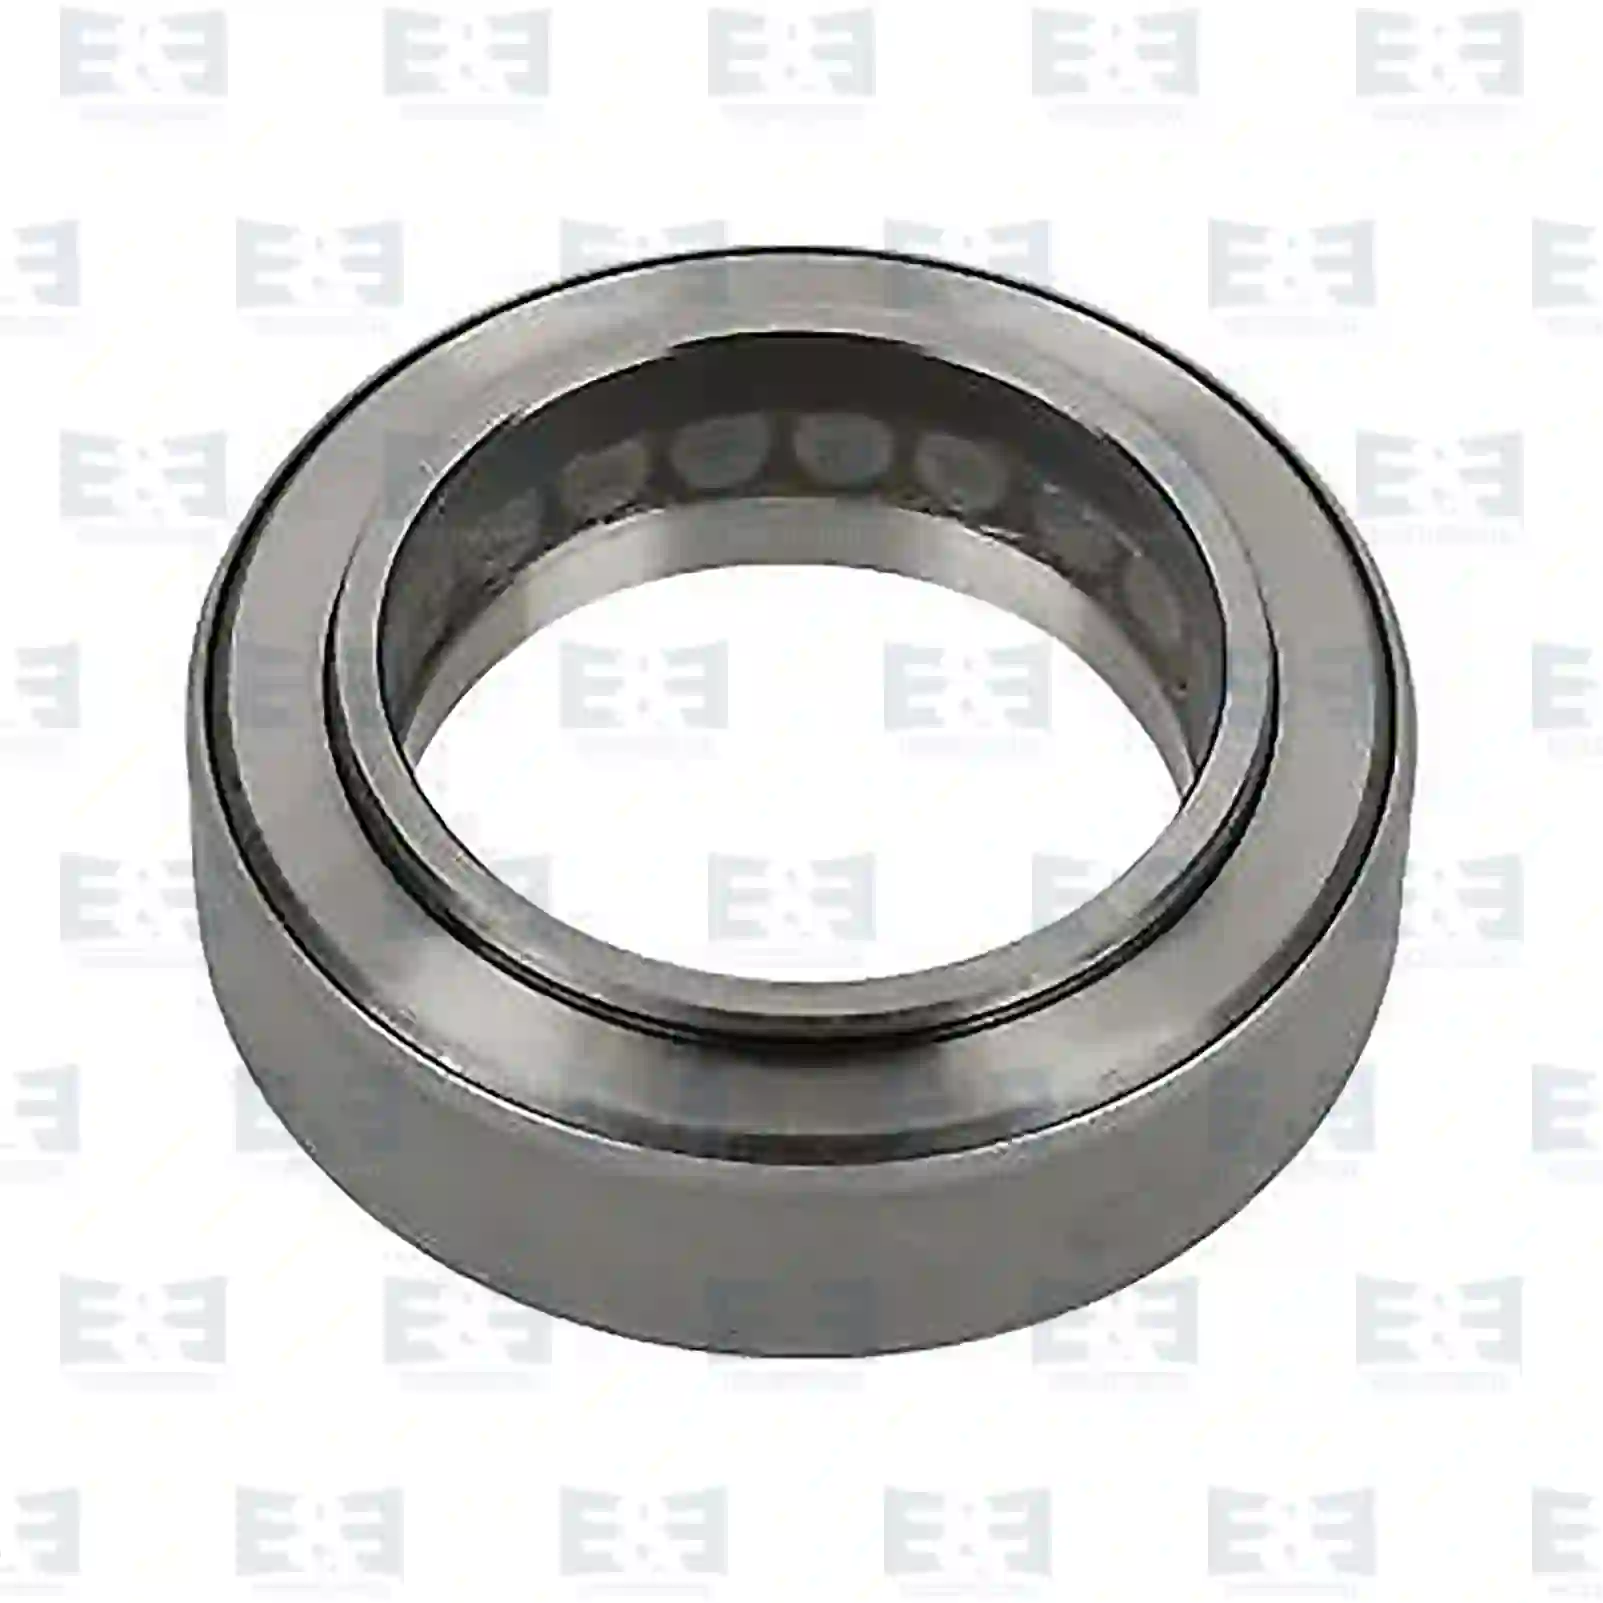  Roller bearing || E&E Truck Spare Parts | Truck Spare Parts, Auotomotive Spare Parts